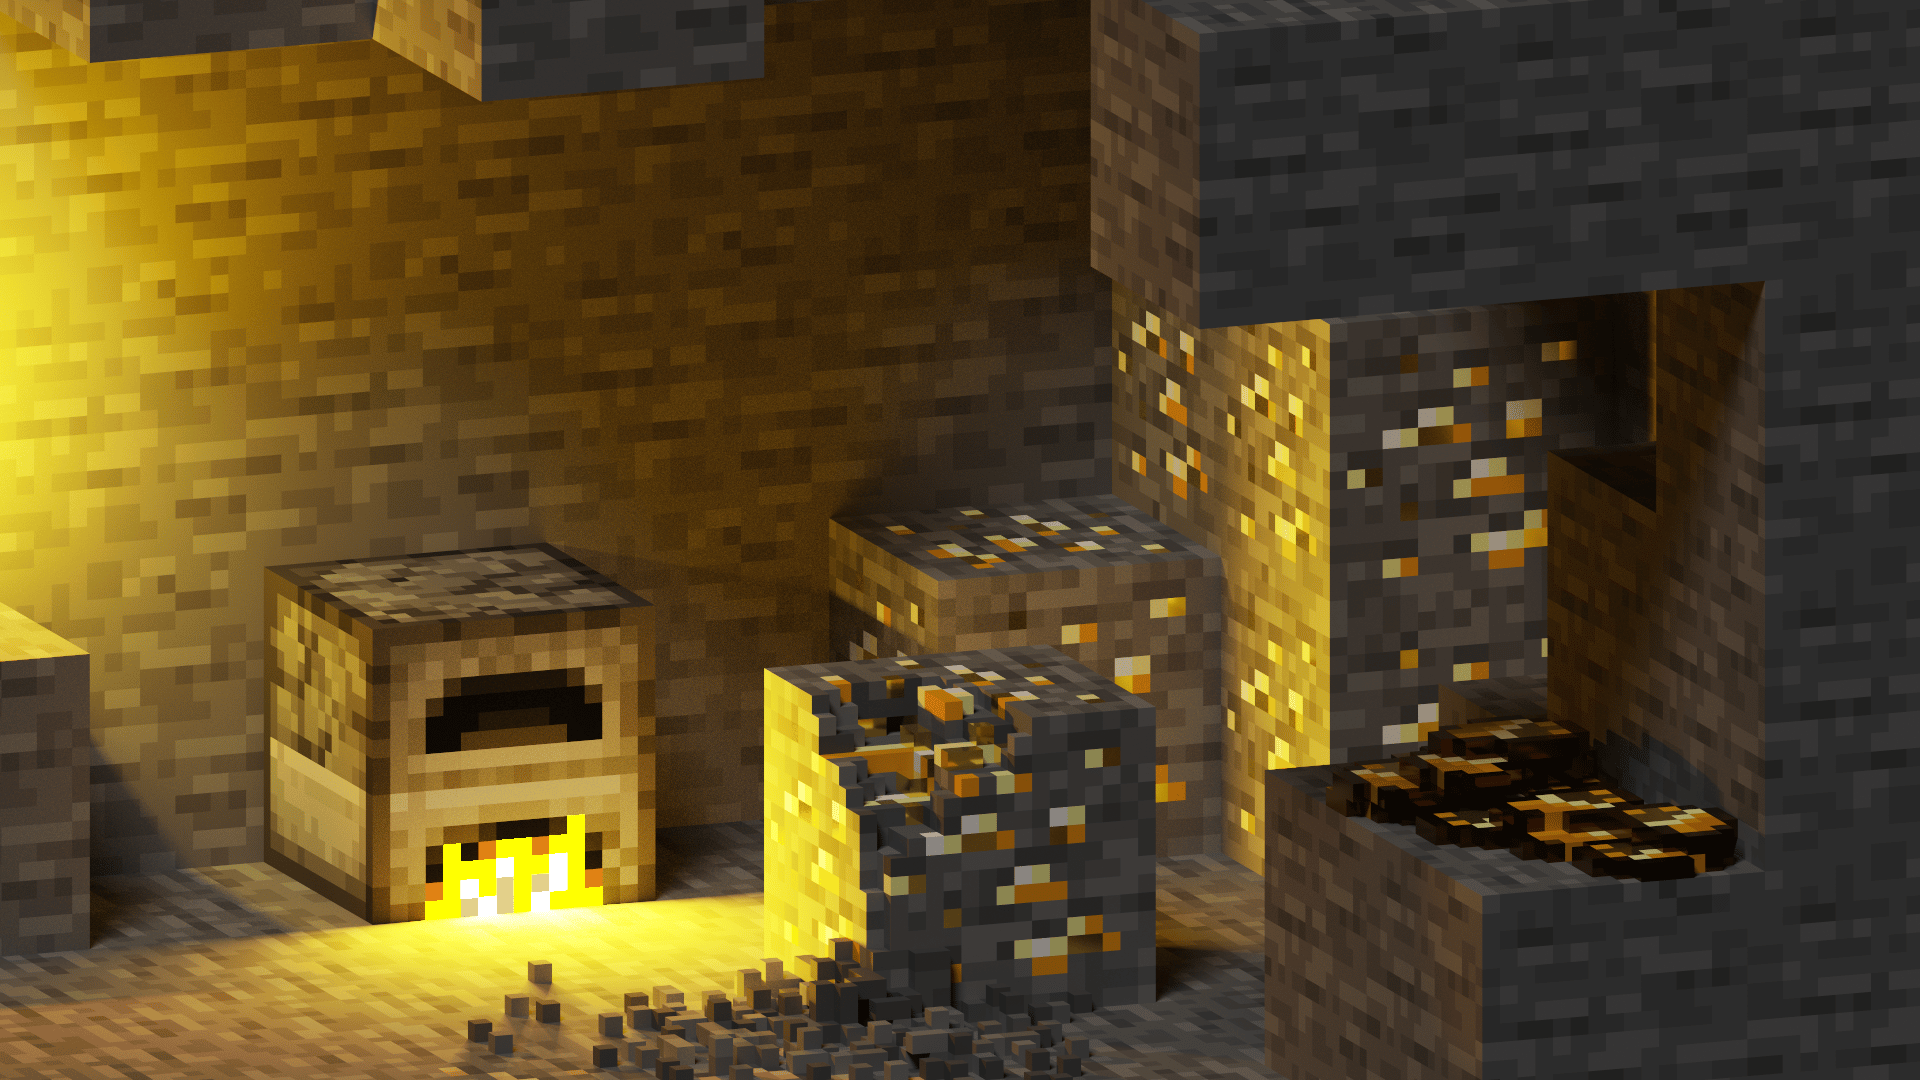 A minecraft scene with fire and stone - Minecraft